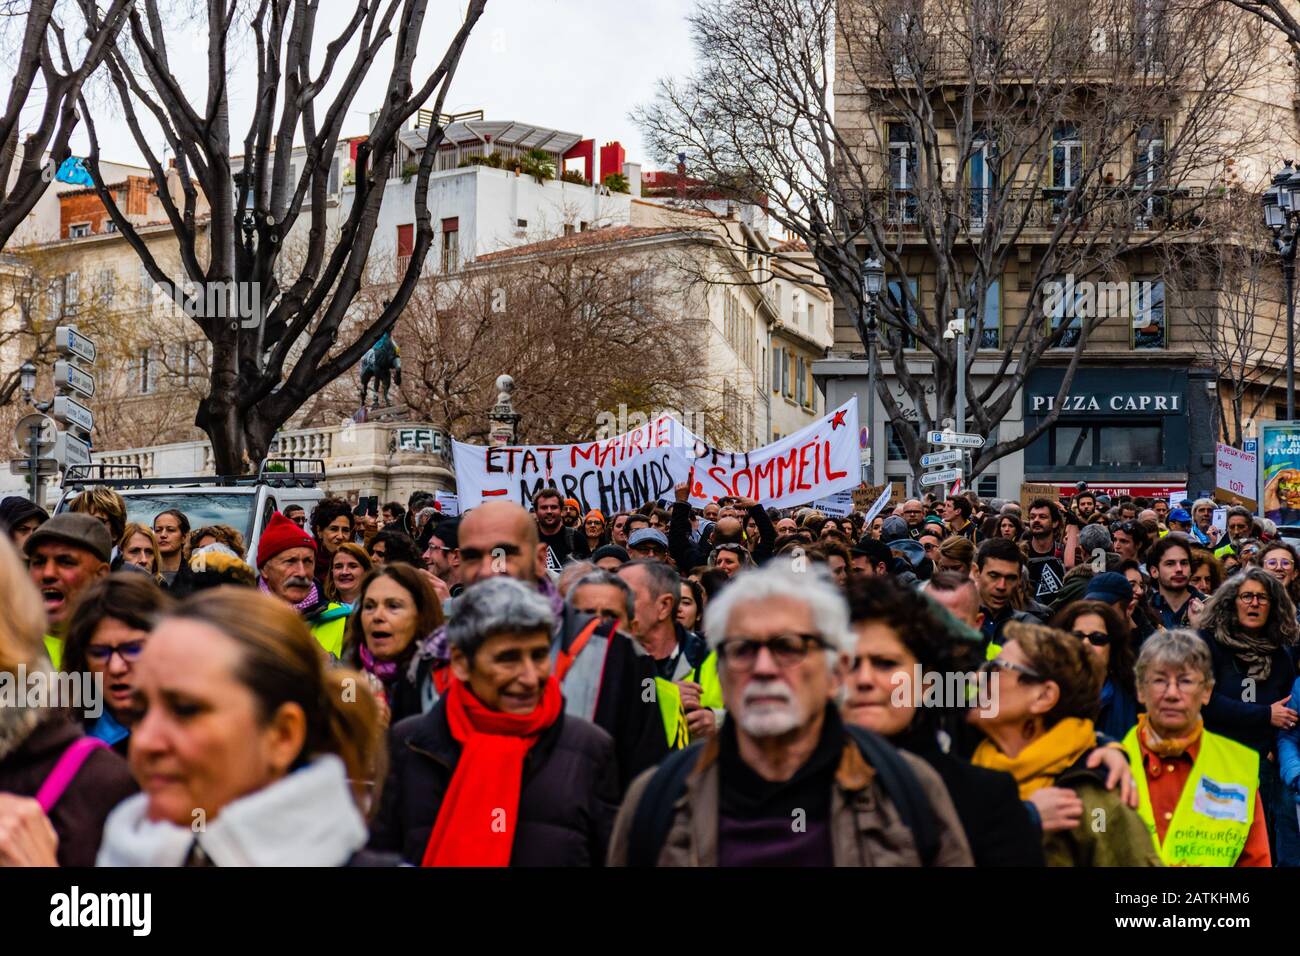 Marseille, France - January 25, 2020: Protesters during a 'marche de la colère' ('the march of anger') concerning housing issues Stock Photo